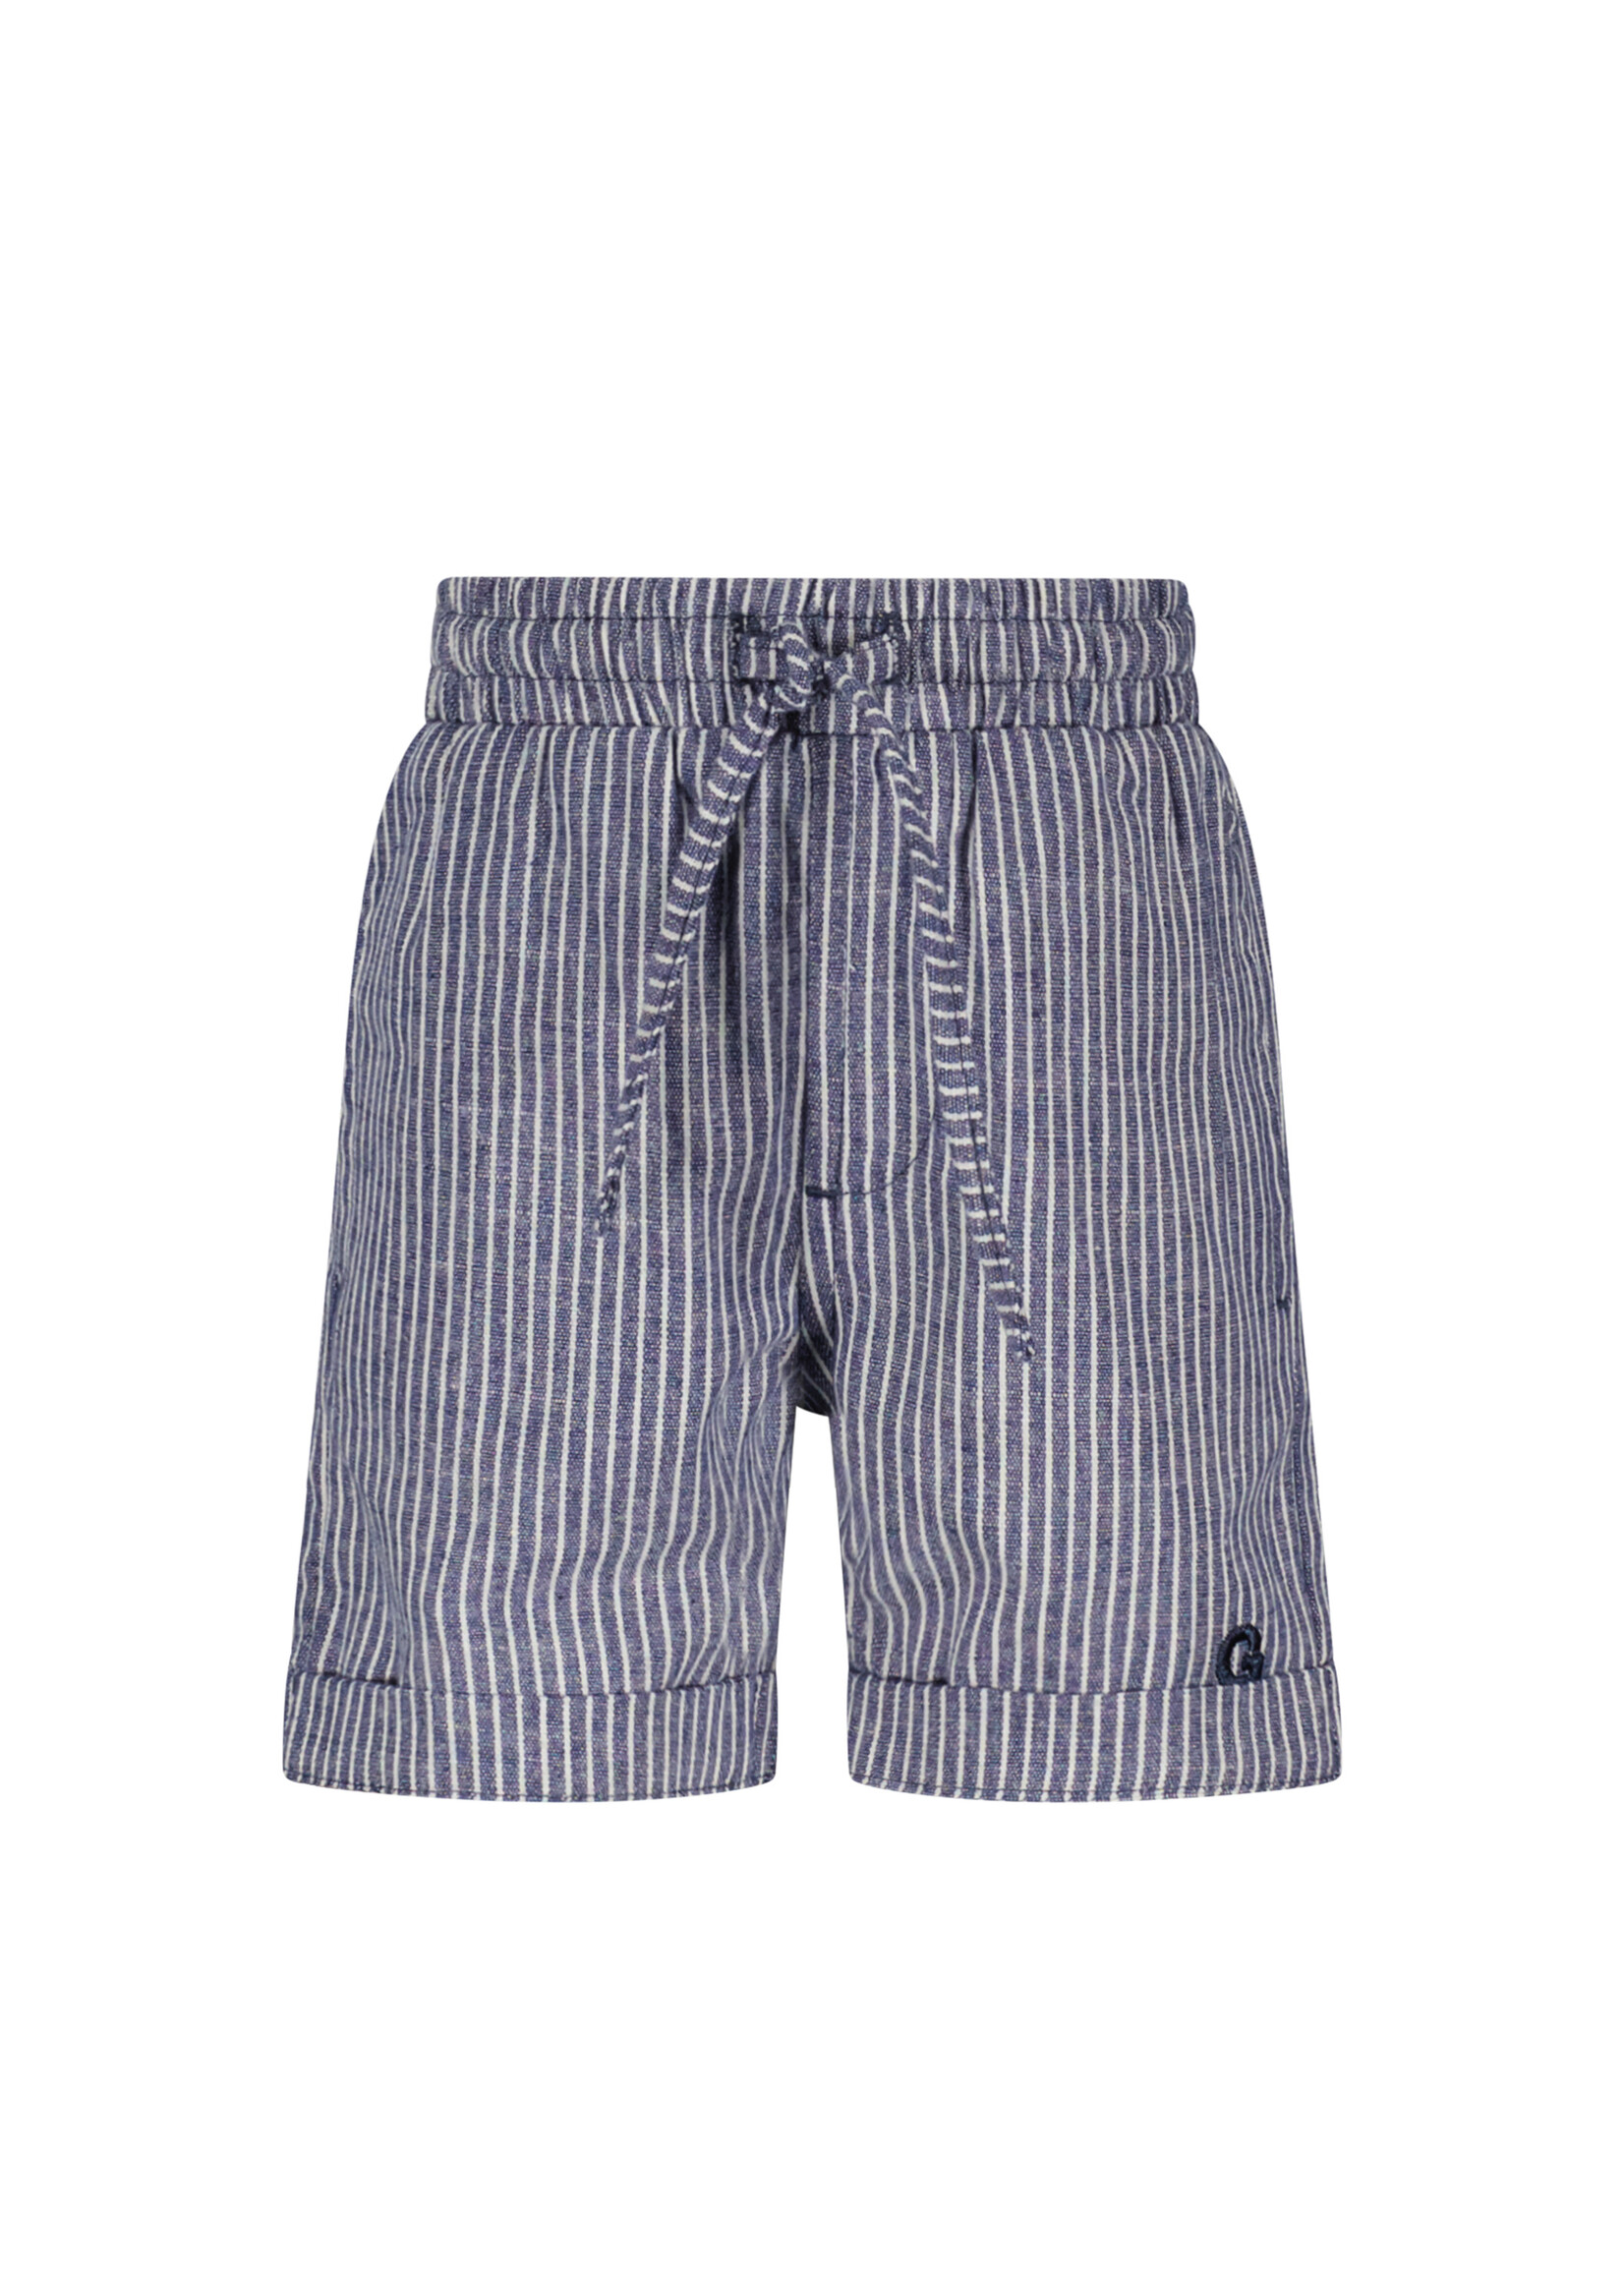 Le Chic Boys Baby L312-8662 DEUCY striped shorts Navy Stripes